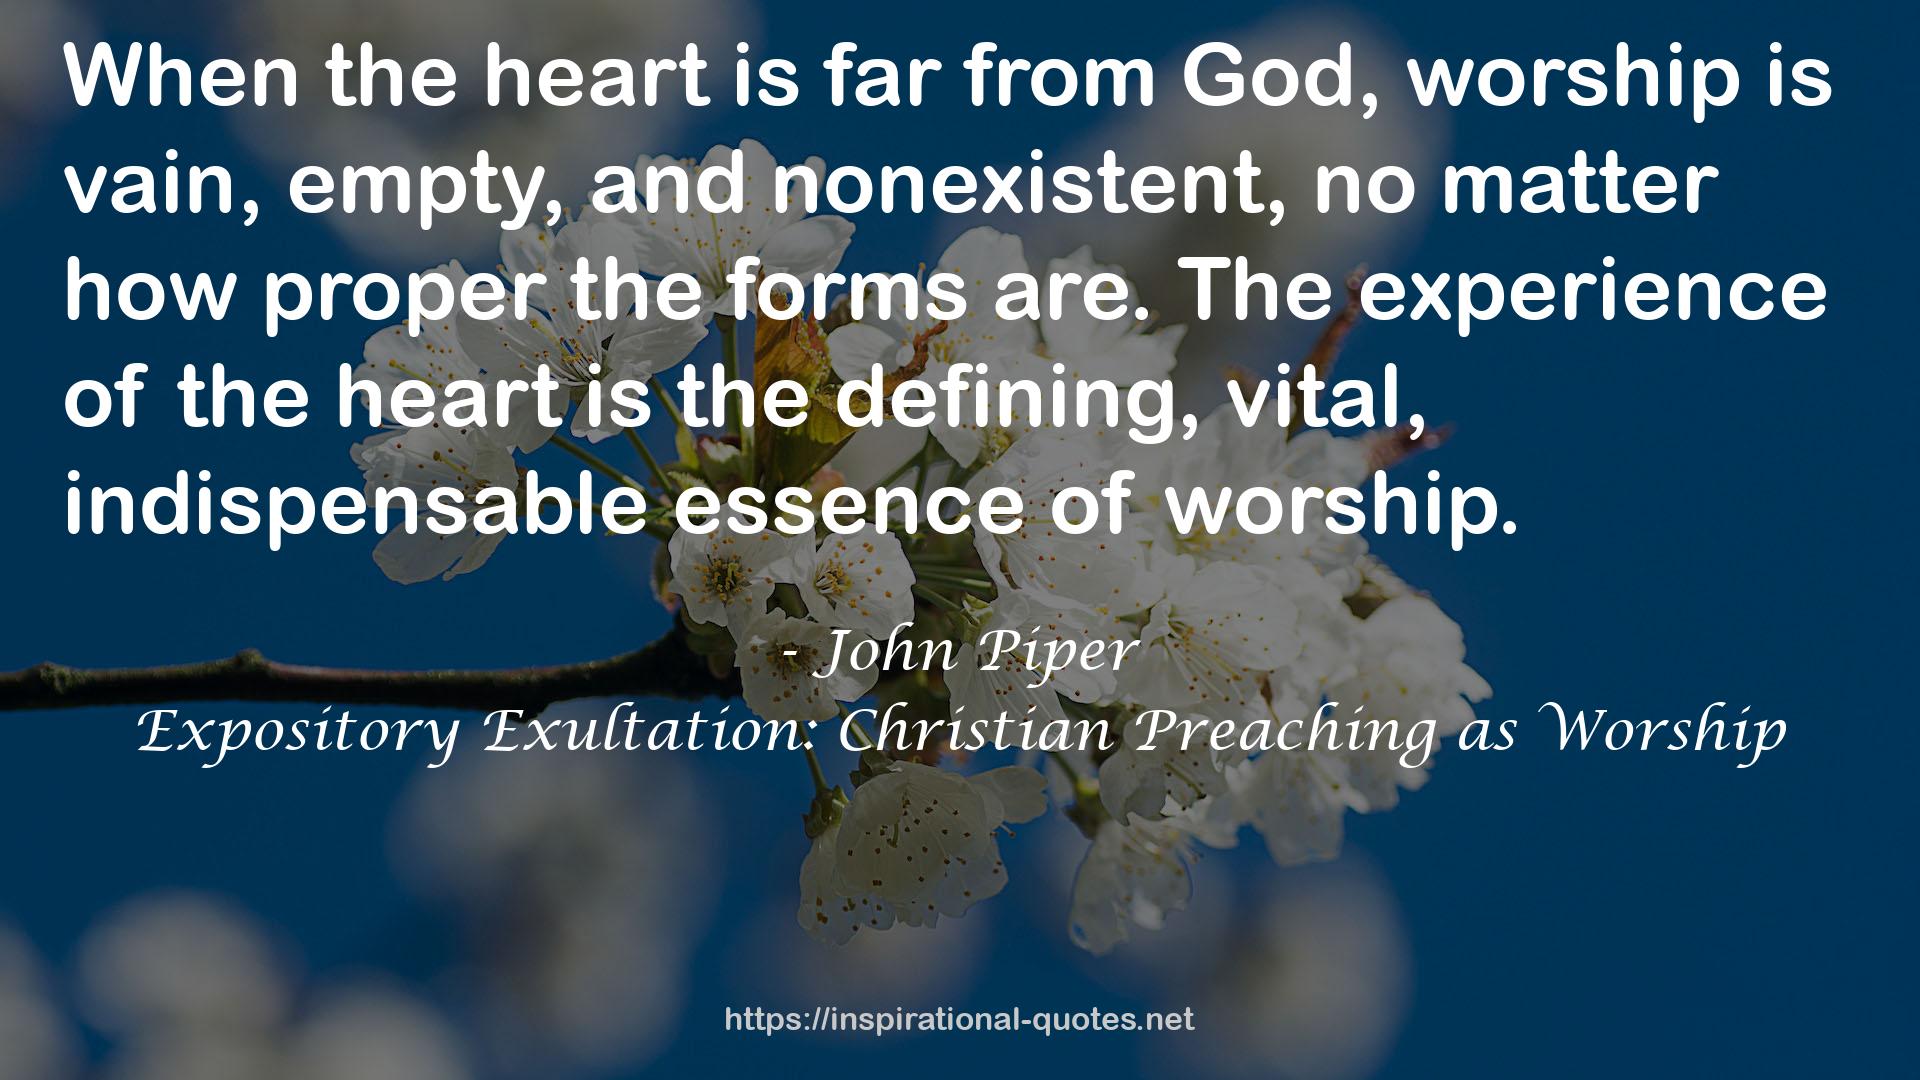 Expository Exultation: Christian Preaching as Worship QUOTES